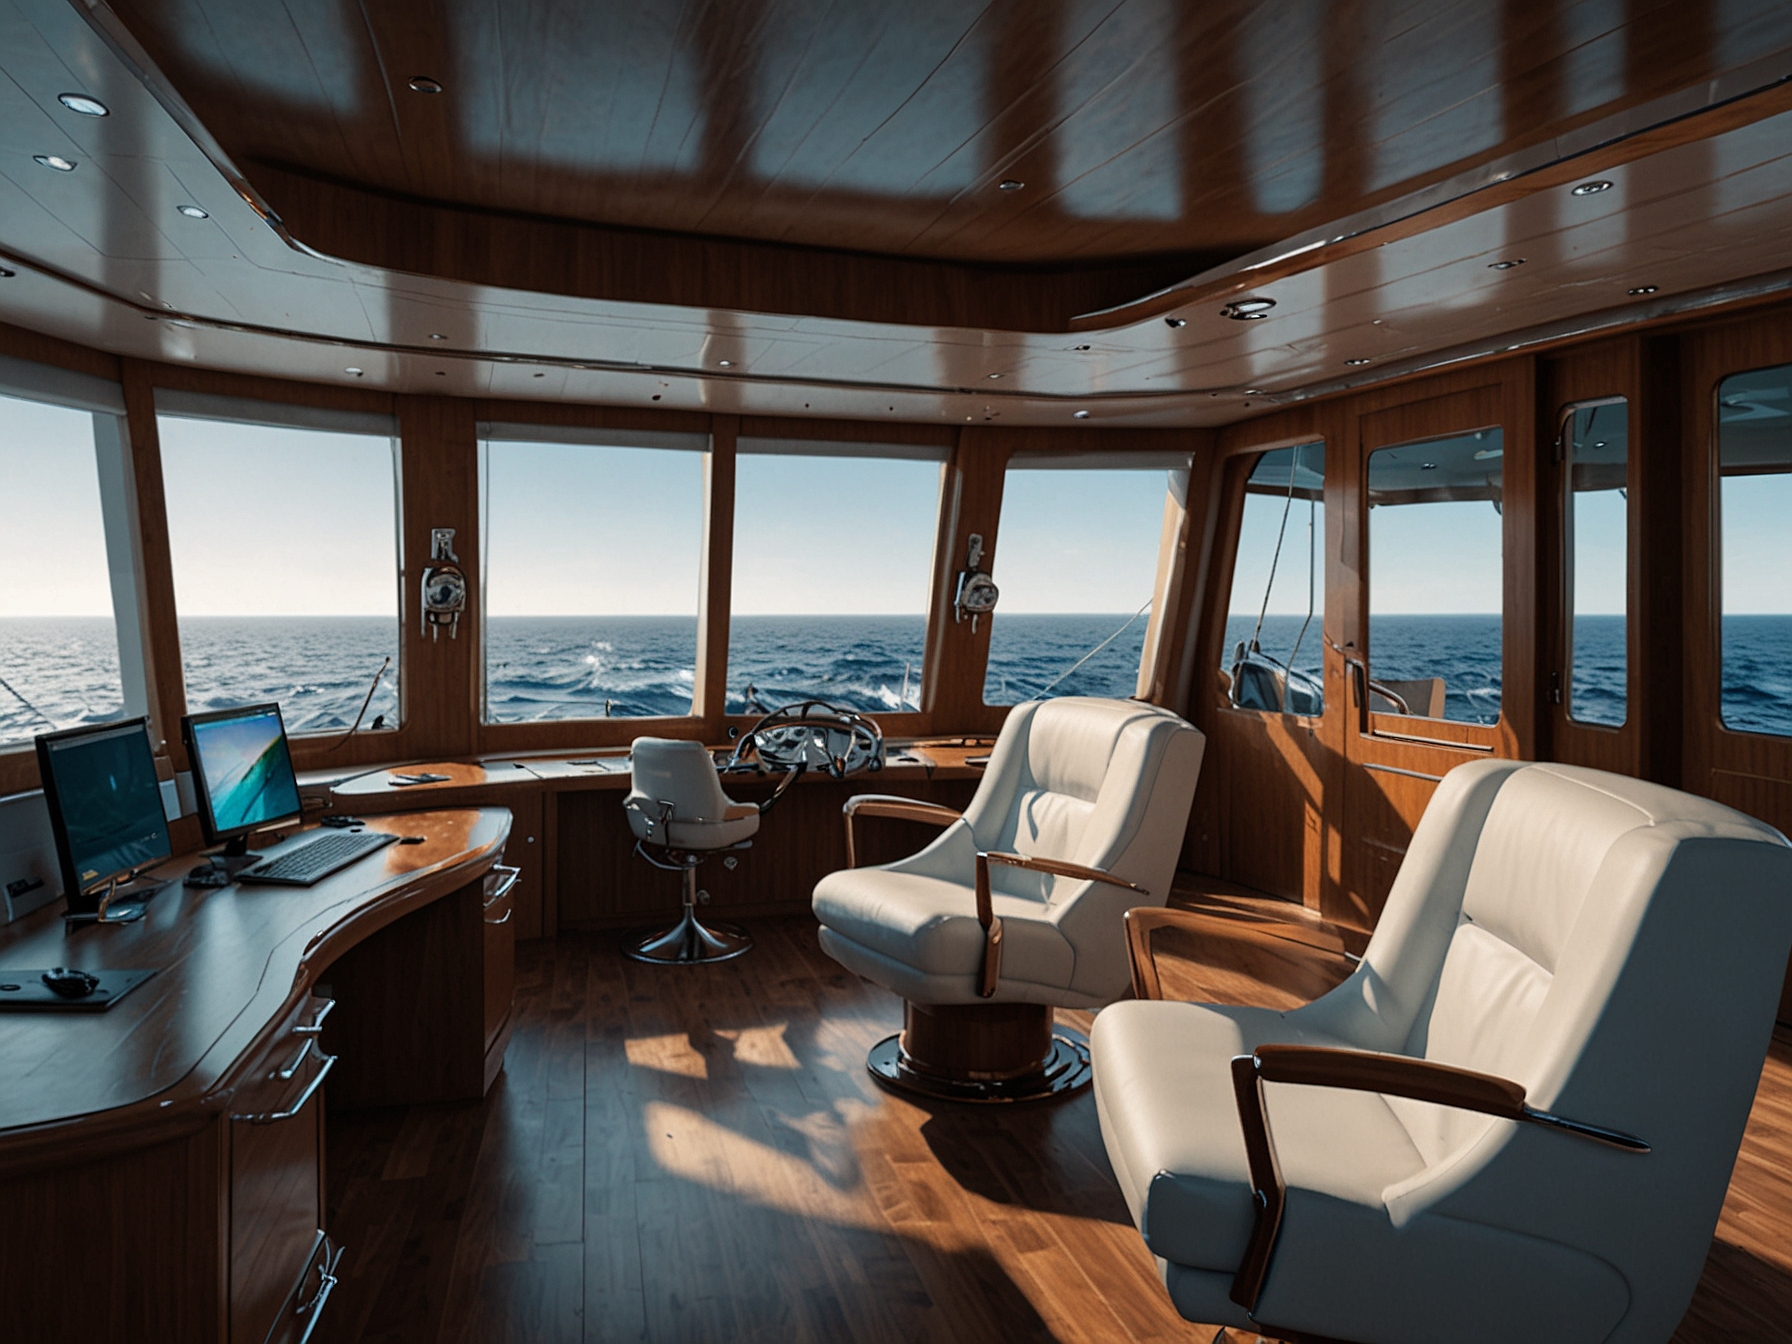 The cockpit area of the 170-foot Feadship sportfishing superyacht features fighting chairs and a tuna tower, optimized for comfort and effectiveness during intense fishing sessions.